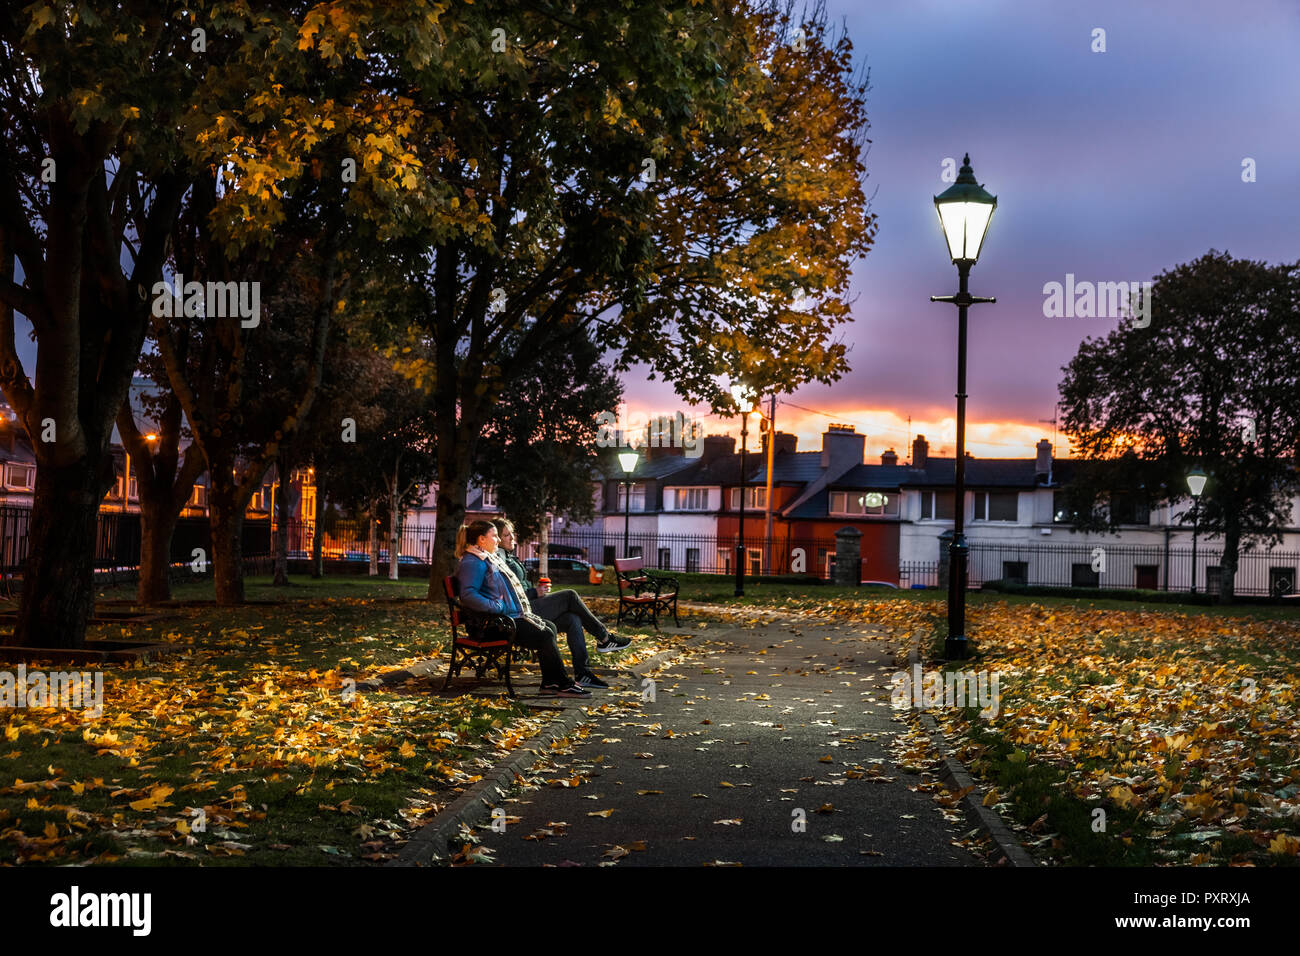 Cork, Ireland. 24th October, 2018. Edel Murphy and Niamh McMullen from Victoria Road, take a moment on their way to work to enjoy the peace and tranquillity on a mild October morning in Shalom Park, Cork City, Ireland. Credit: David Creedon/Alamy Live News Stock Photo